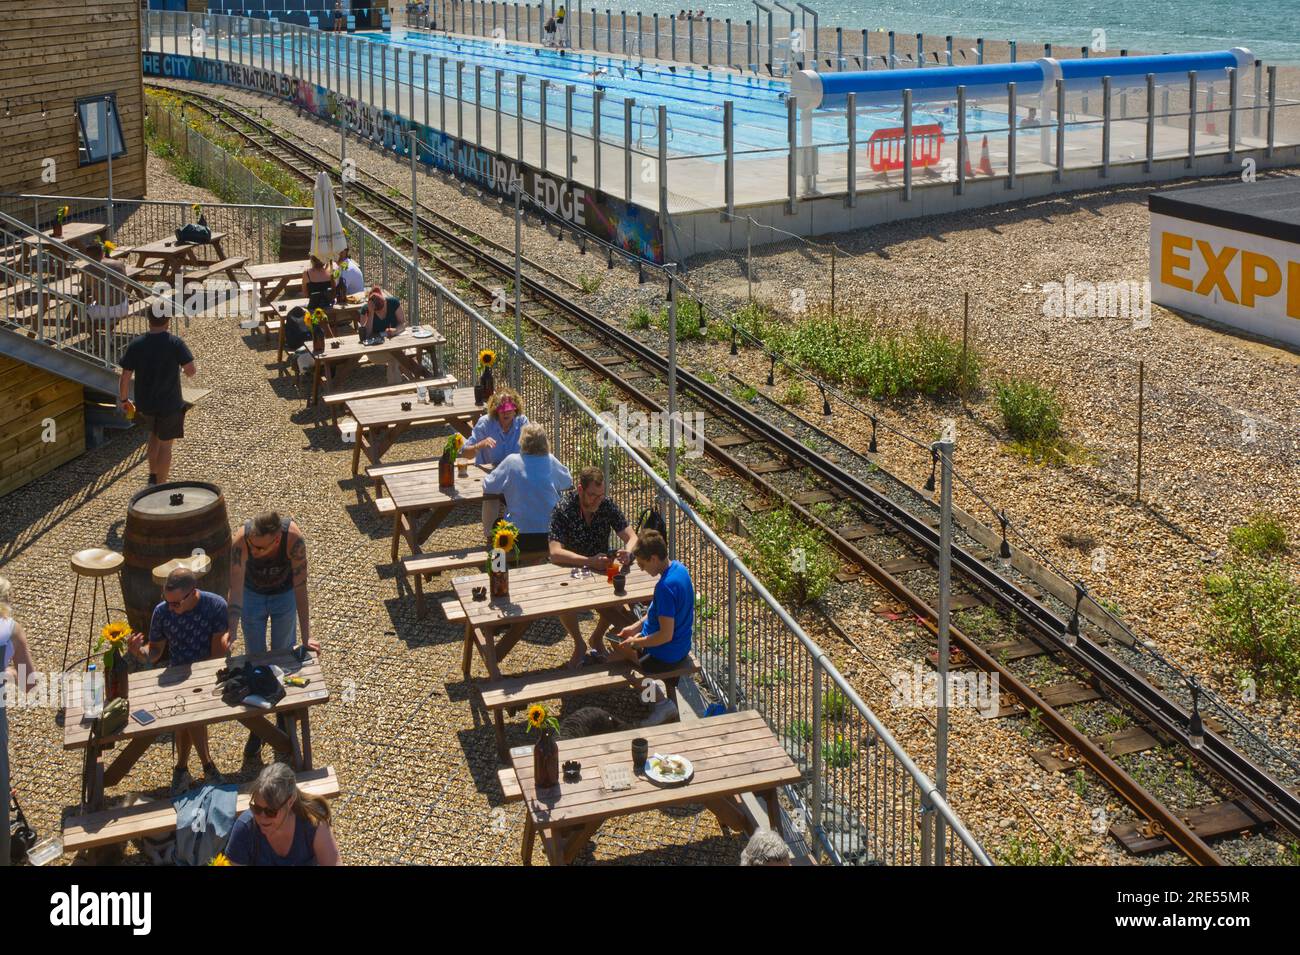 New swimming poo, cafe and restaurant on shingle beach at Brighton, East Sussex, England. With people in pool and cafe. Stock Photo